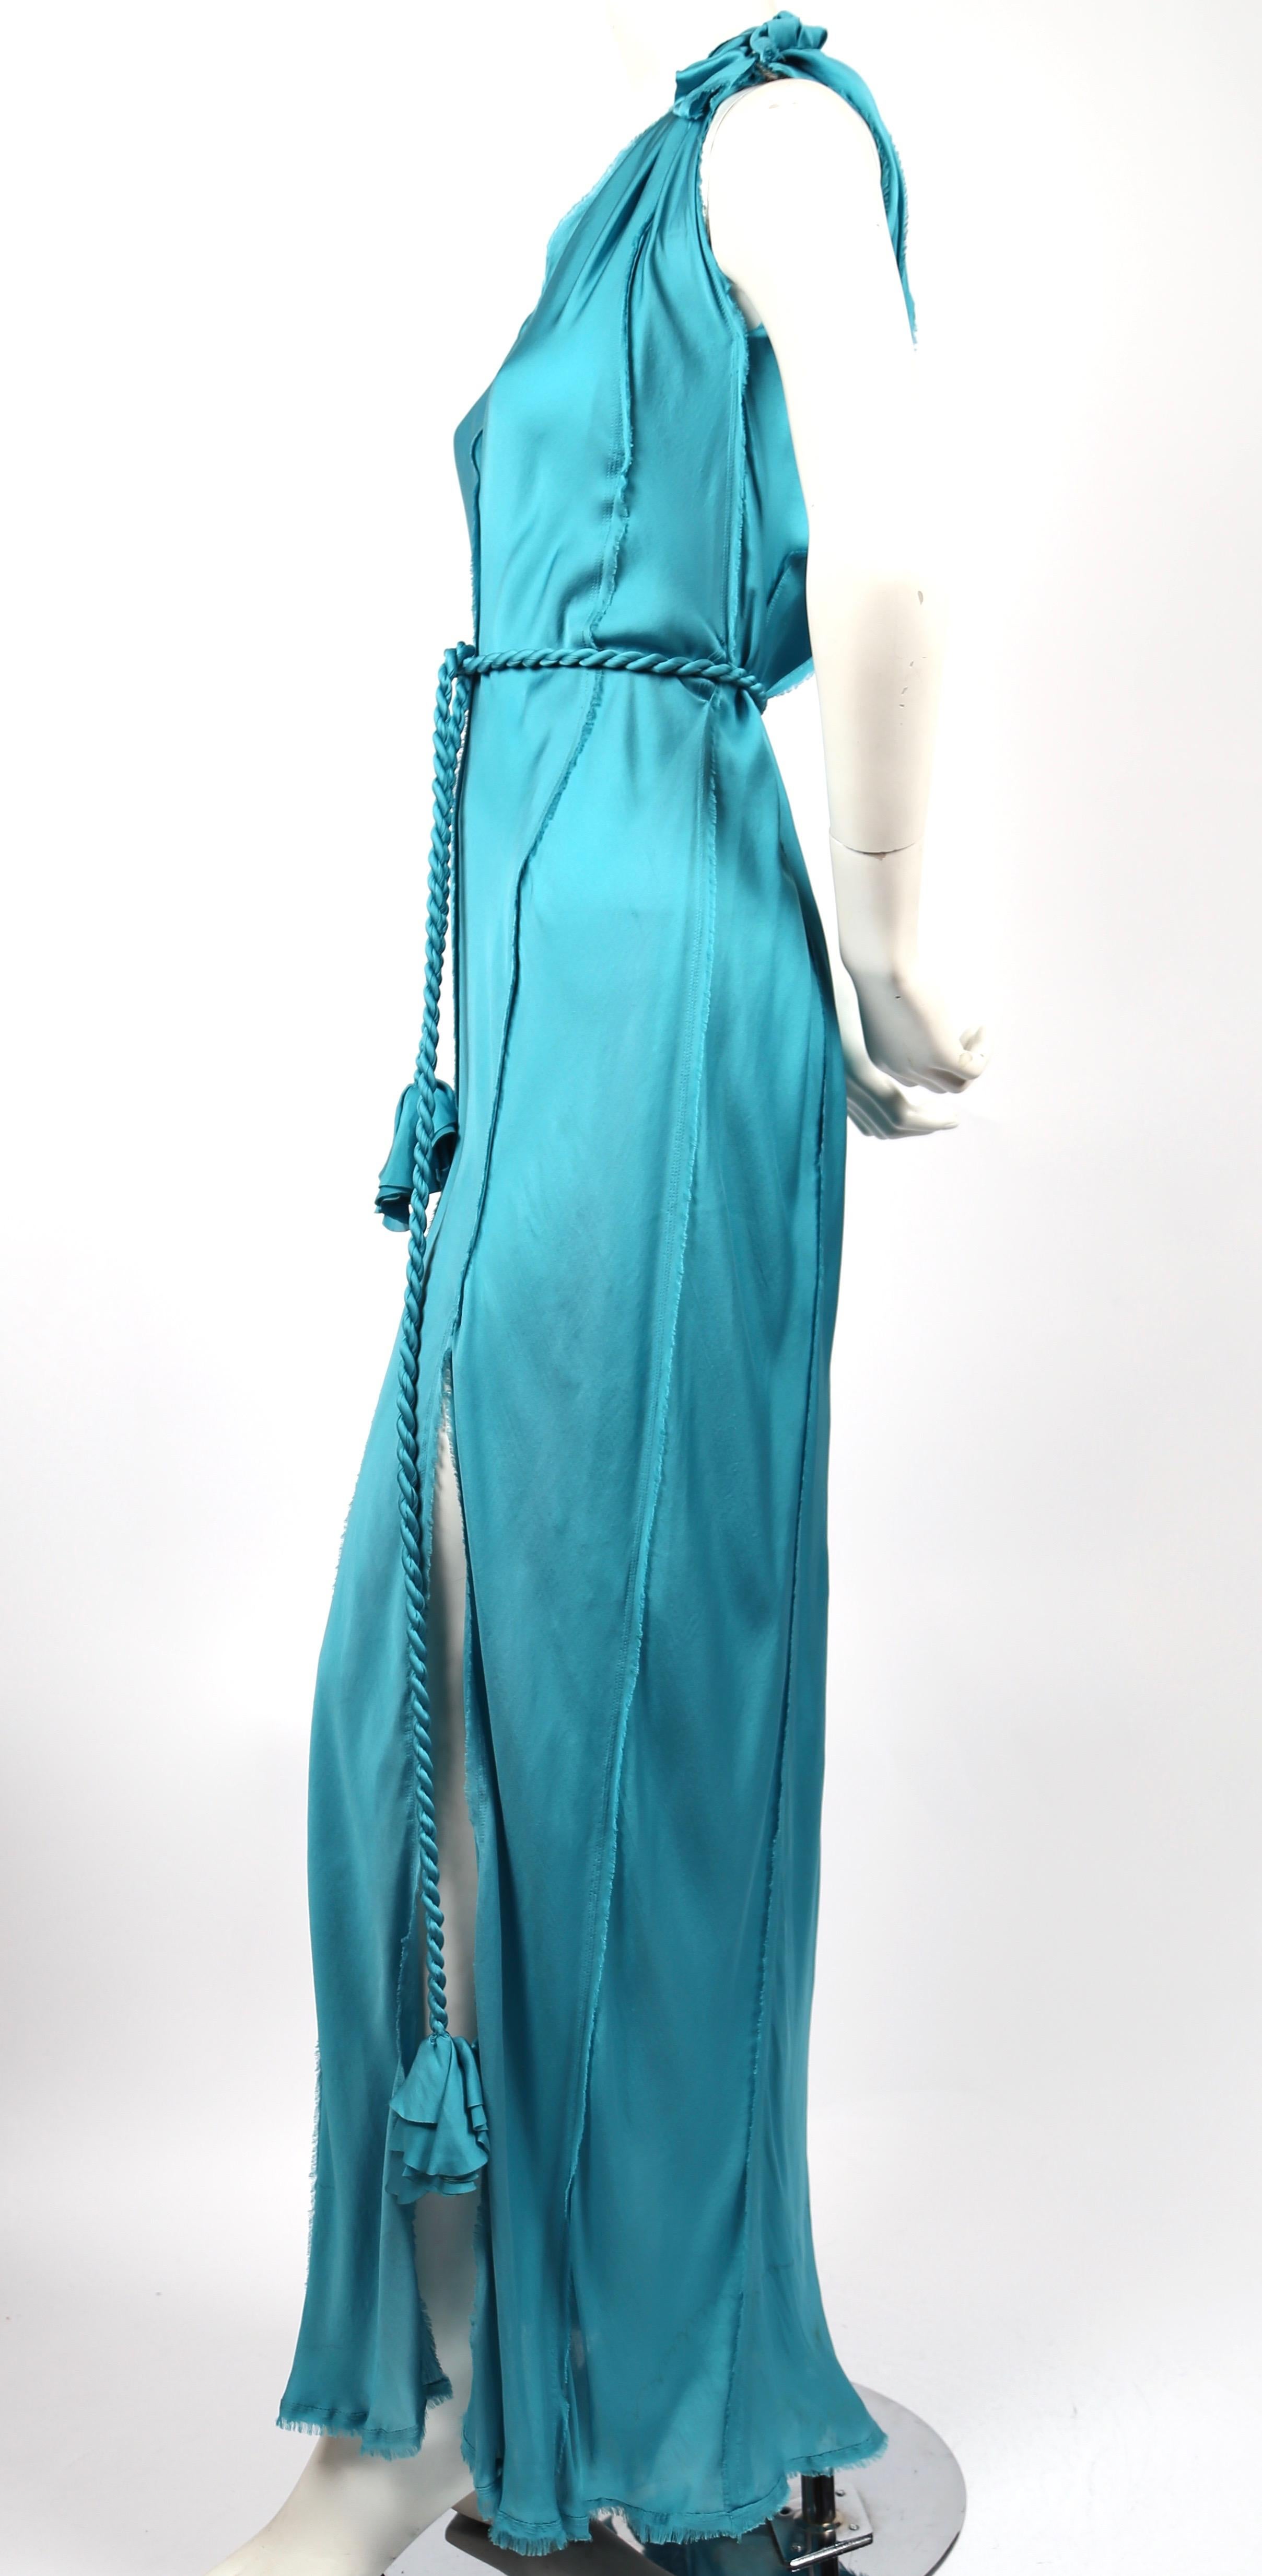 Turquoise silk, bias cut, dress with raw edges and twisted rope belt with rosettes designed by Alber Elbaz For Lanvin dating to spring of 2012. French size 36.  Measurements are very difficult to take due to the bias cut however approximate length